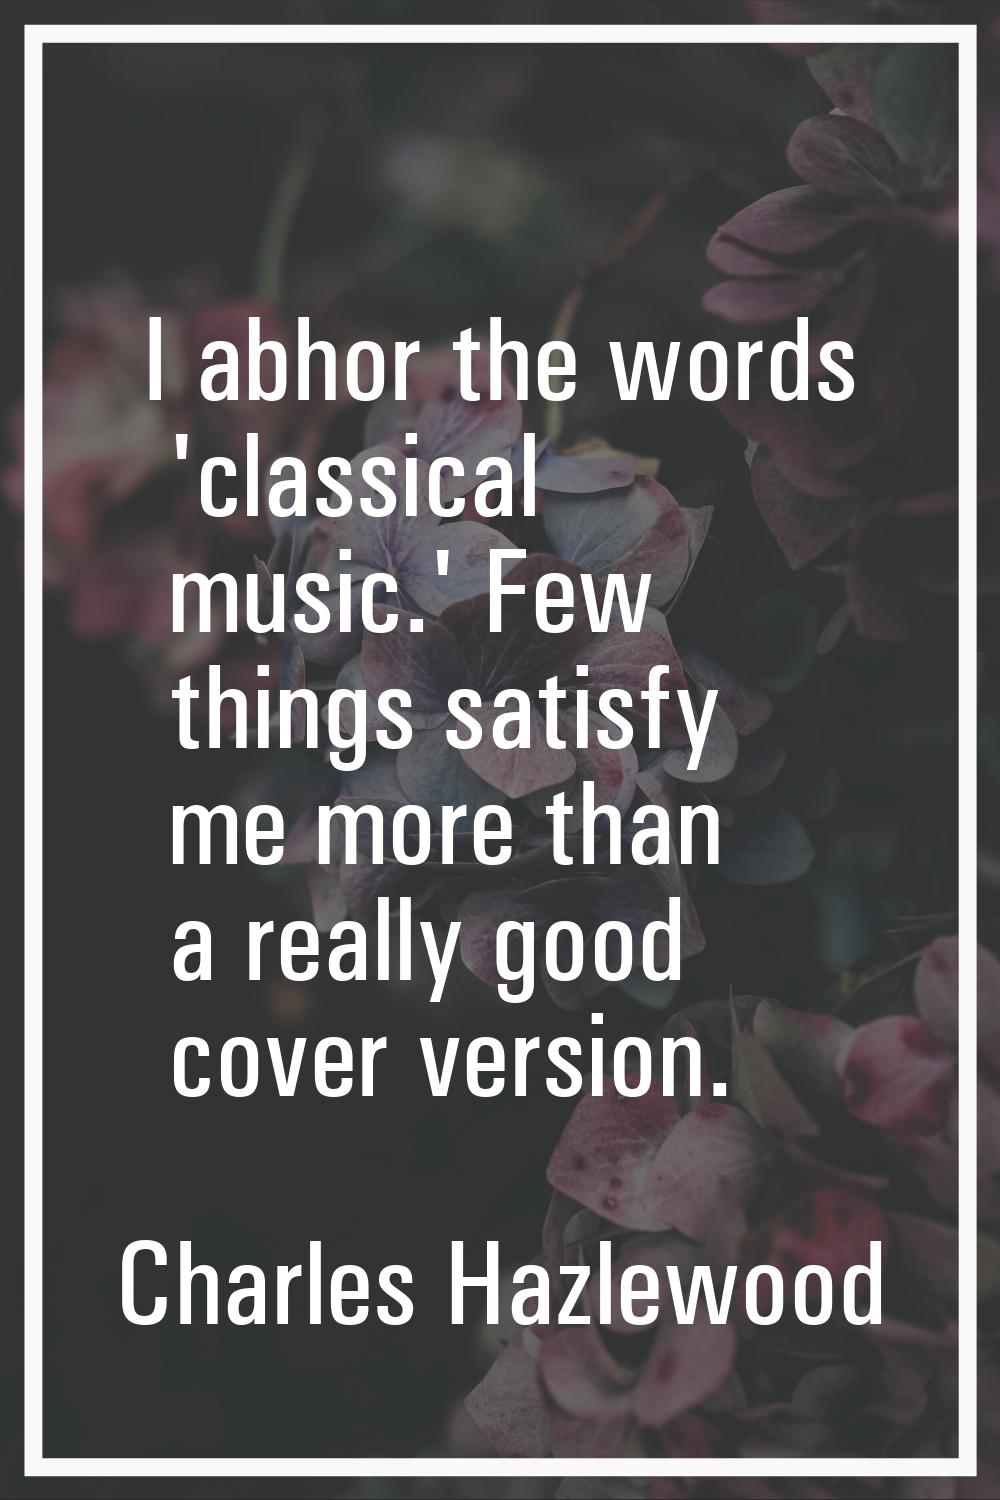 I abhor the words 'classical music.' Few things satisfy me more than a really good cover version.